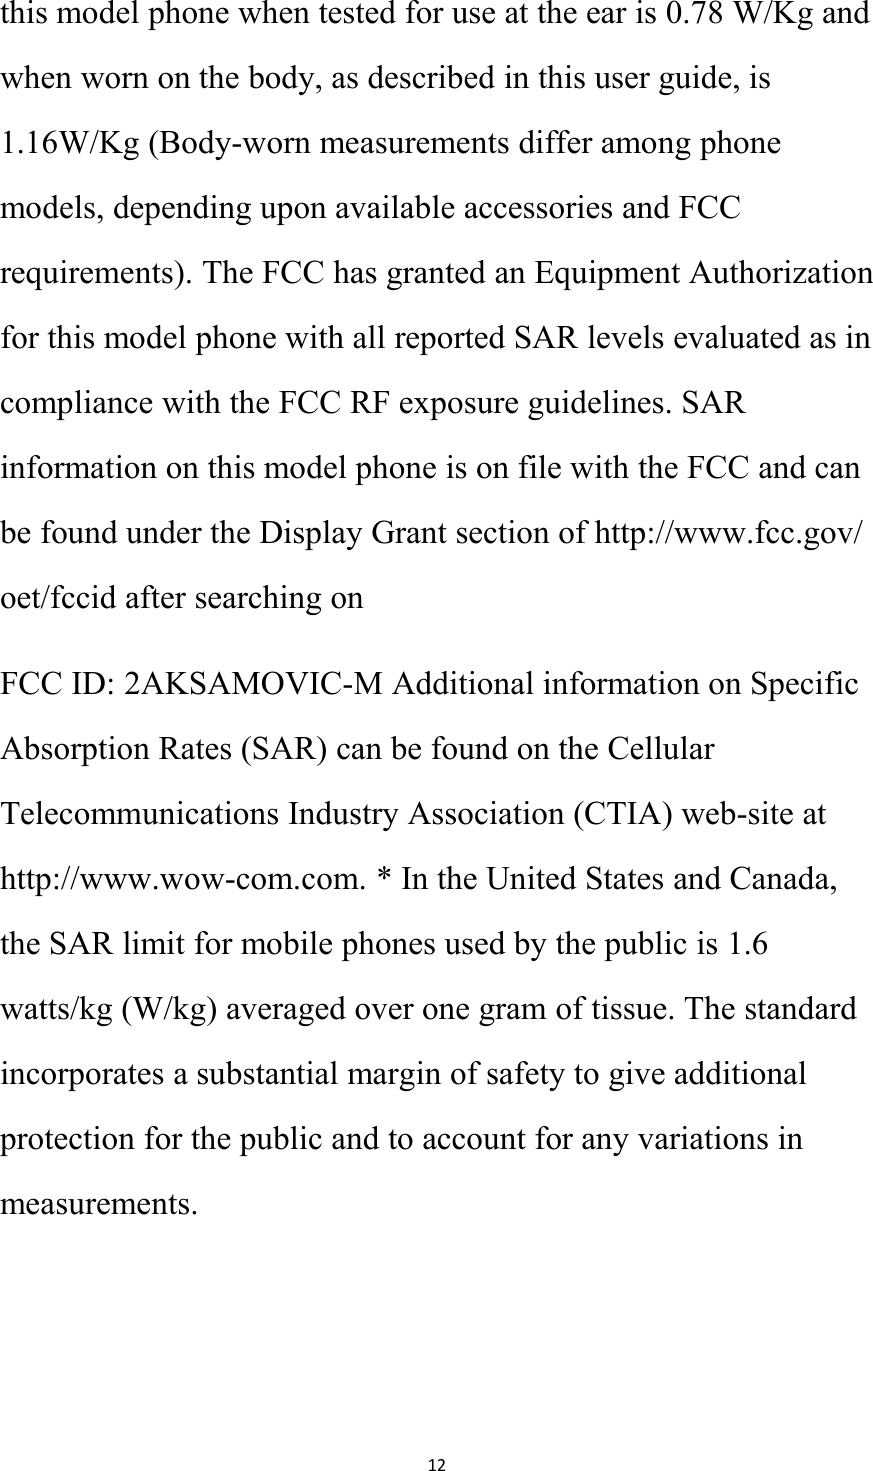 12this model phone when tested for use at the ear is 0.78 W/Kg andwhen worn on the body, as described in this user guide, is1.16W/Kg (Body-worn measurements differ among phonemodels, depending upon available accessories and FCCrequirements). The FCC has granted an Equipment Authorizationfor this model phone with all reported SAR levels evaluated as incompliance with the FCC RF exposure guidelines. SARinformation on this model phone is on file with the FCC and canbe found under the Display Grant section of http://www.fcc.gov/oet/fccid after searching onFCC ID: 2AKSAMOVIC-M Additional information on SpecificAbsorption Rates (SAR) can be found on the CellularTelecommunications Industry Association (CTIA) web-site athttp://www.wow-com.com. * In the United States and Canada,the SAR limit for mobile phones used by the public is 1.6watts/kg (W/kg) averaged over one gram of tissue. The standardincorporates a substantial margin of safety to give additionalprotection for the public and to account for any variations inmeasurements.